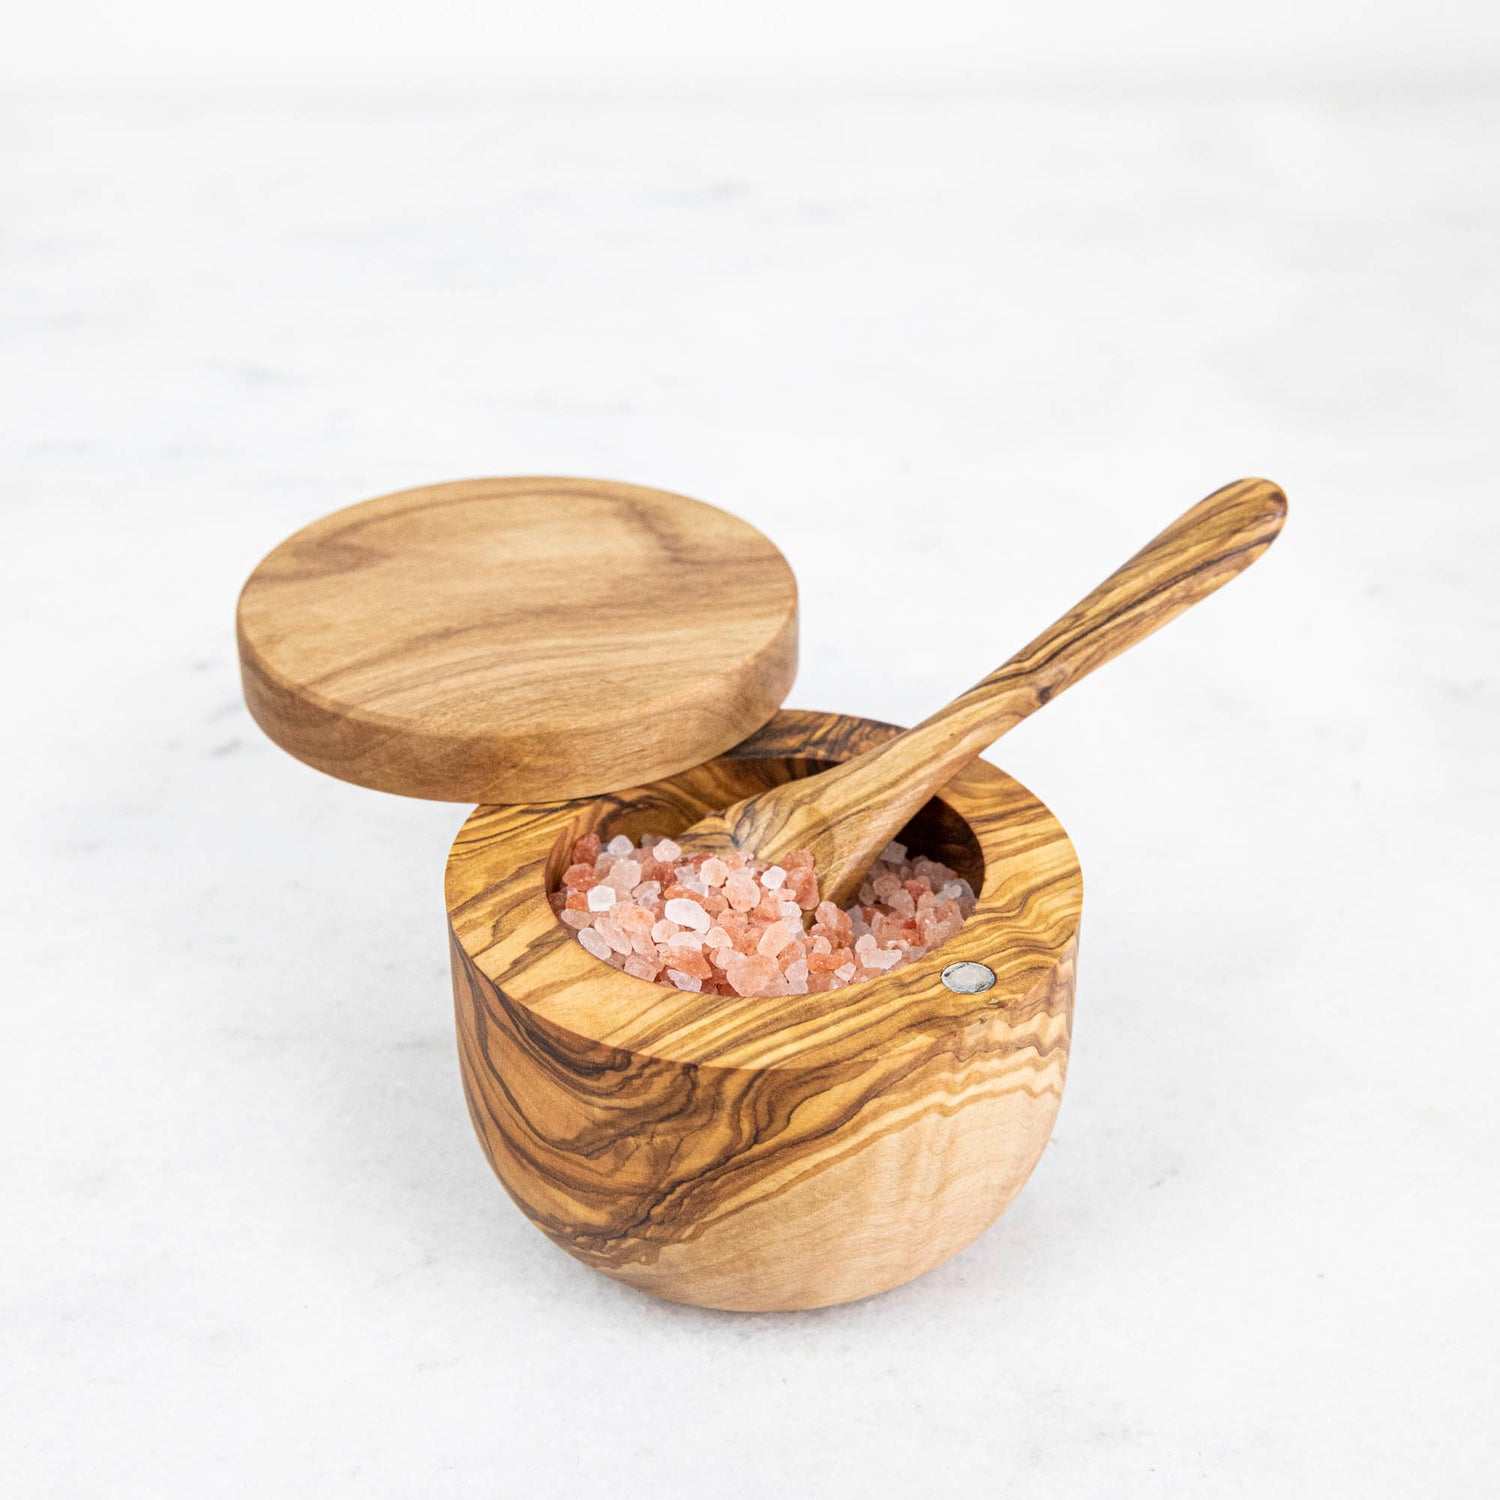 HTB Large Bamboo Salt and Pepper Bowls by HTB, Divided Salt Cellar With  Swivel Lid and Spoon, Seasoning Containers With Magnetic Lid to Keep Dry,  Mini Spoon Built Into Top & Reviews